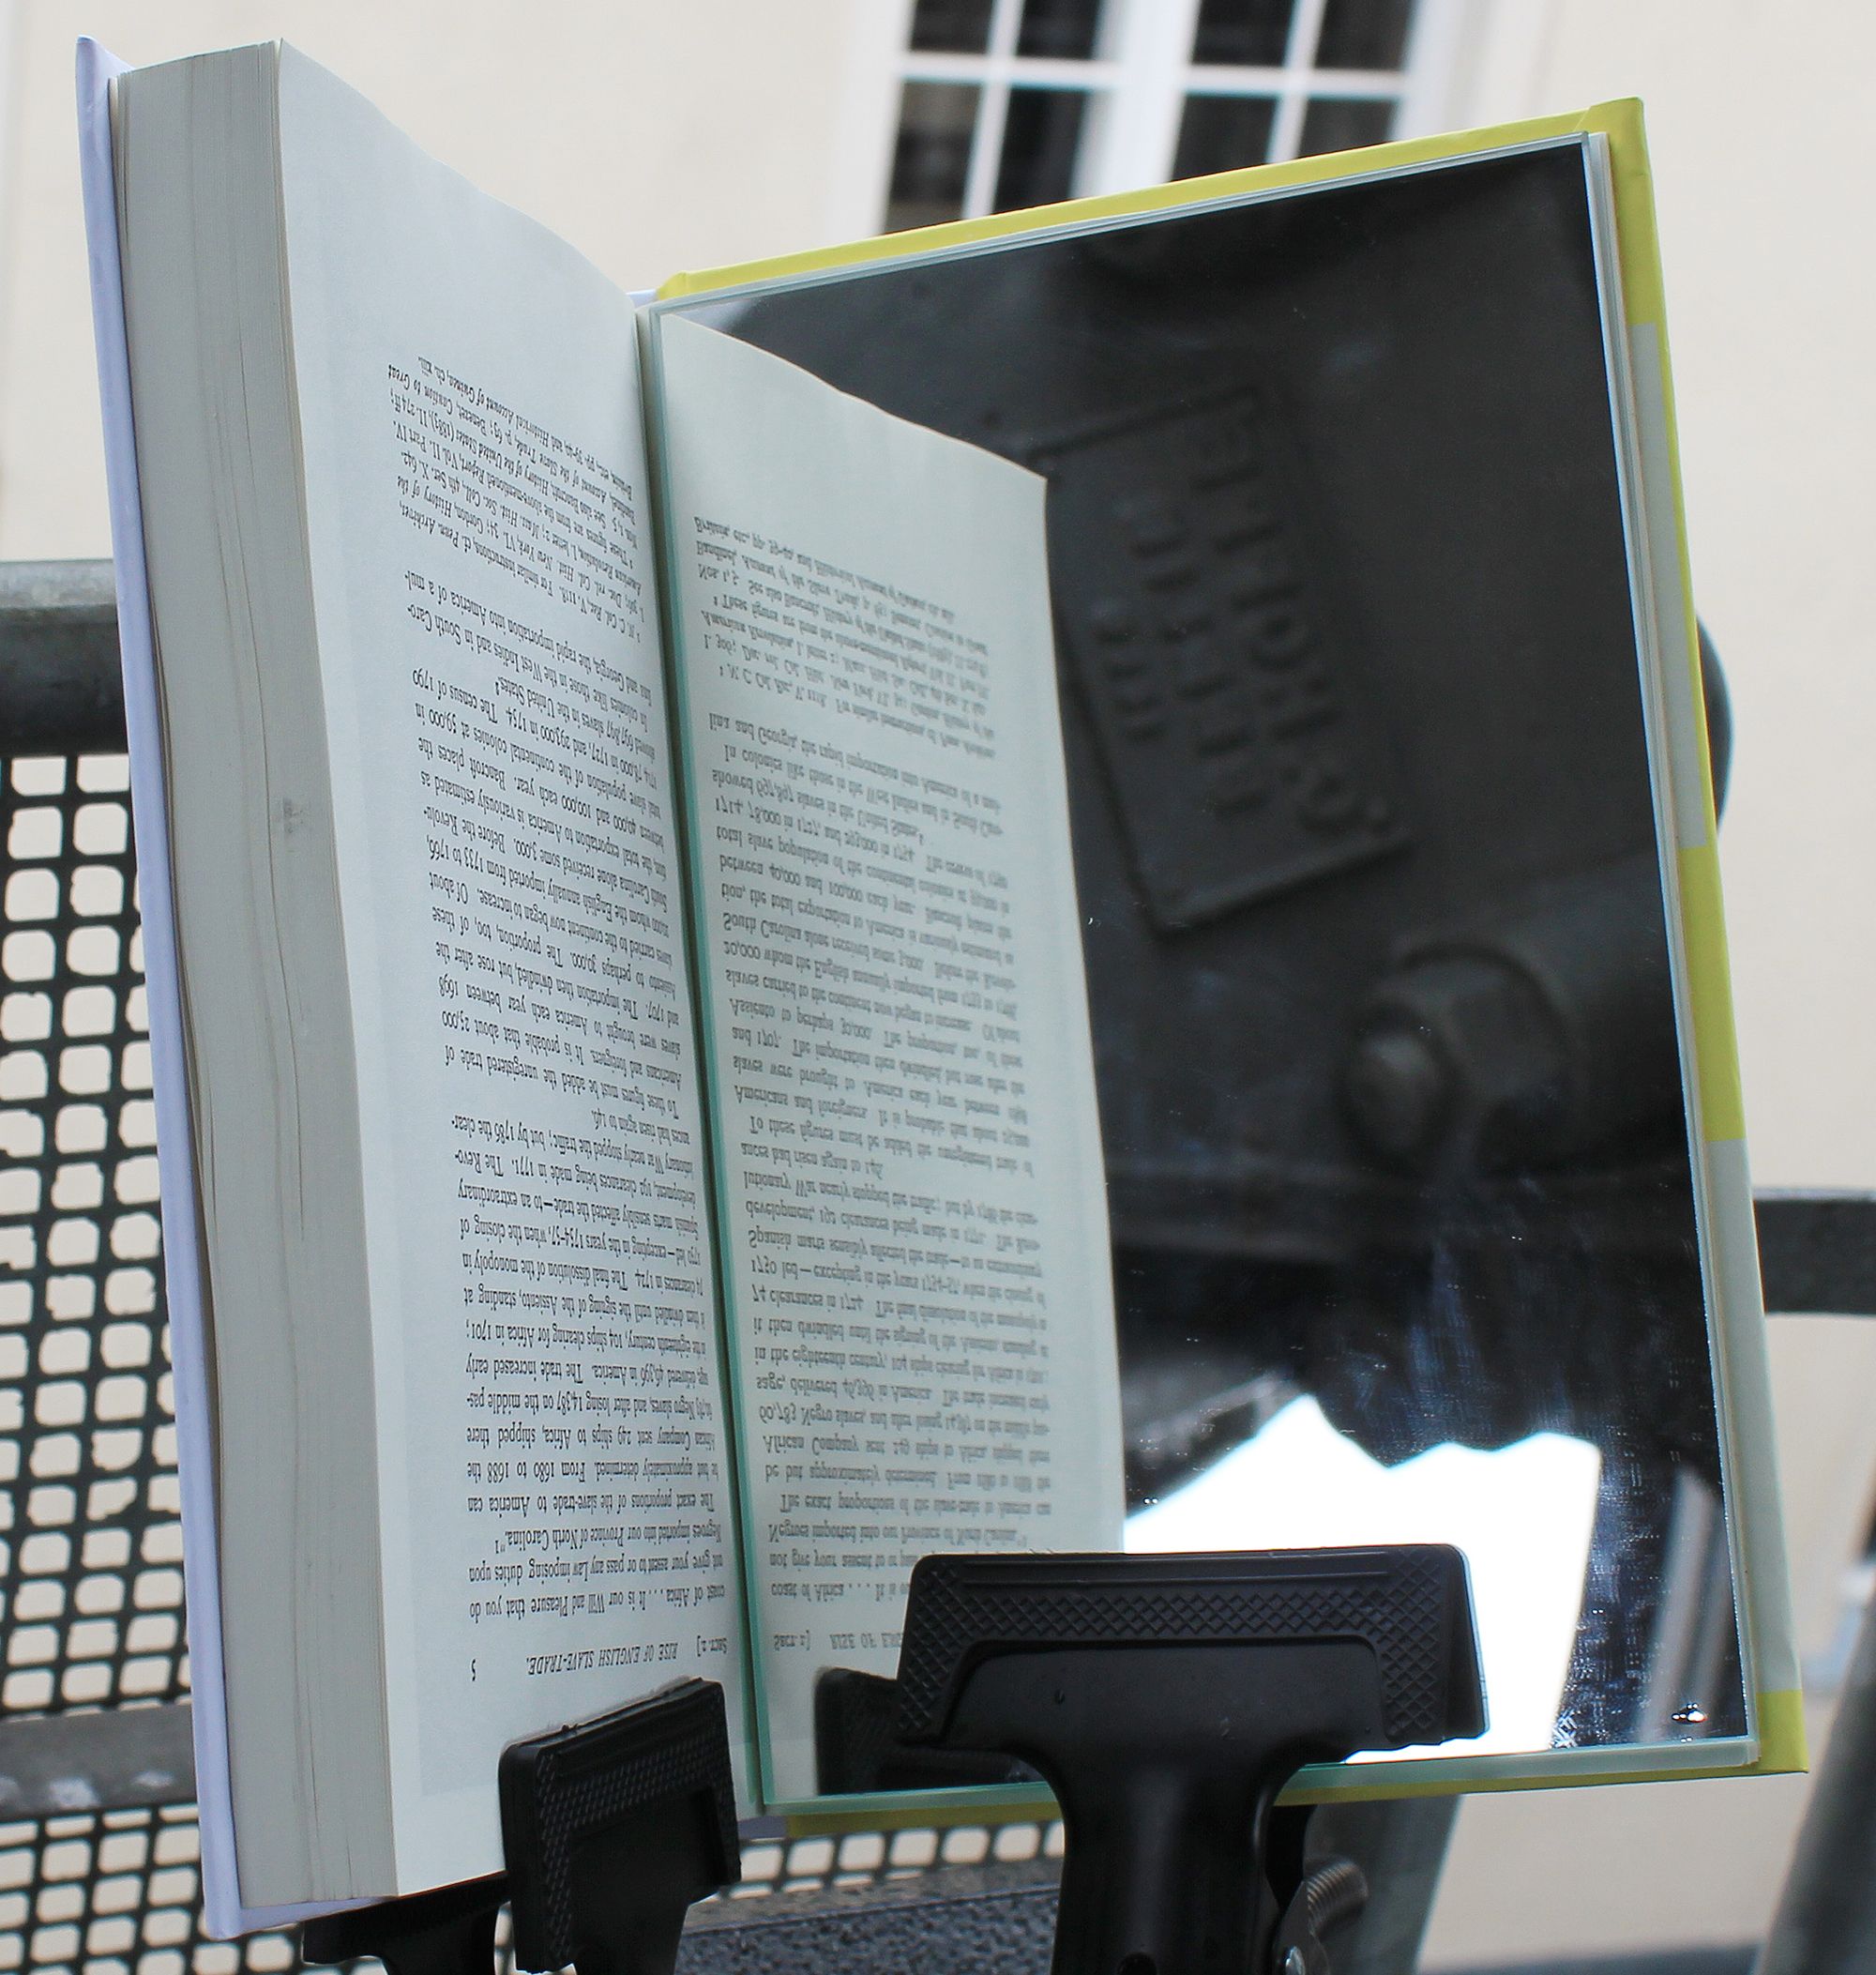 Close-up view of mirror in W. E. B Du Bois book for PPKK 07.00 by Sarah Ancelle Schoenfeld and Louis-Philippe Scoufaras at Archenhold Observatory Berlin